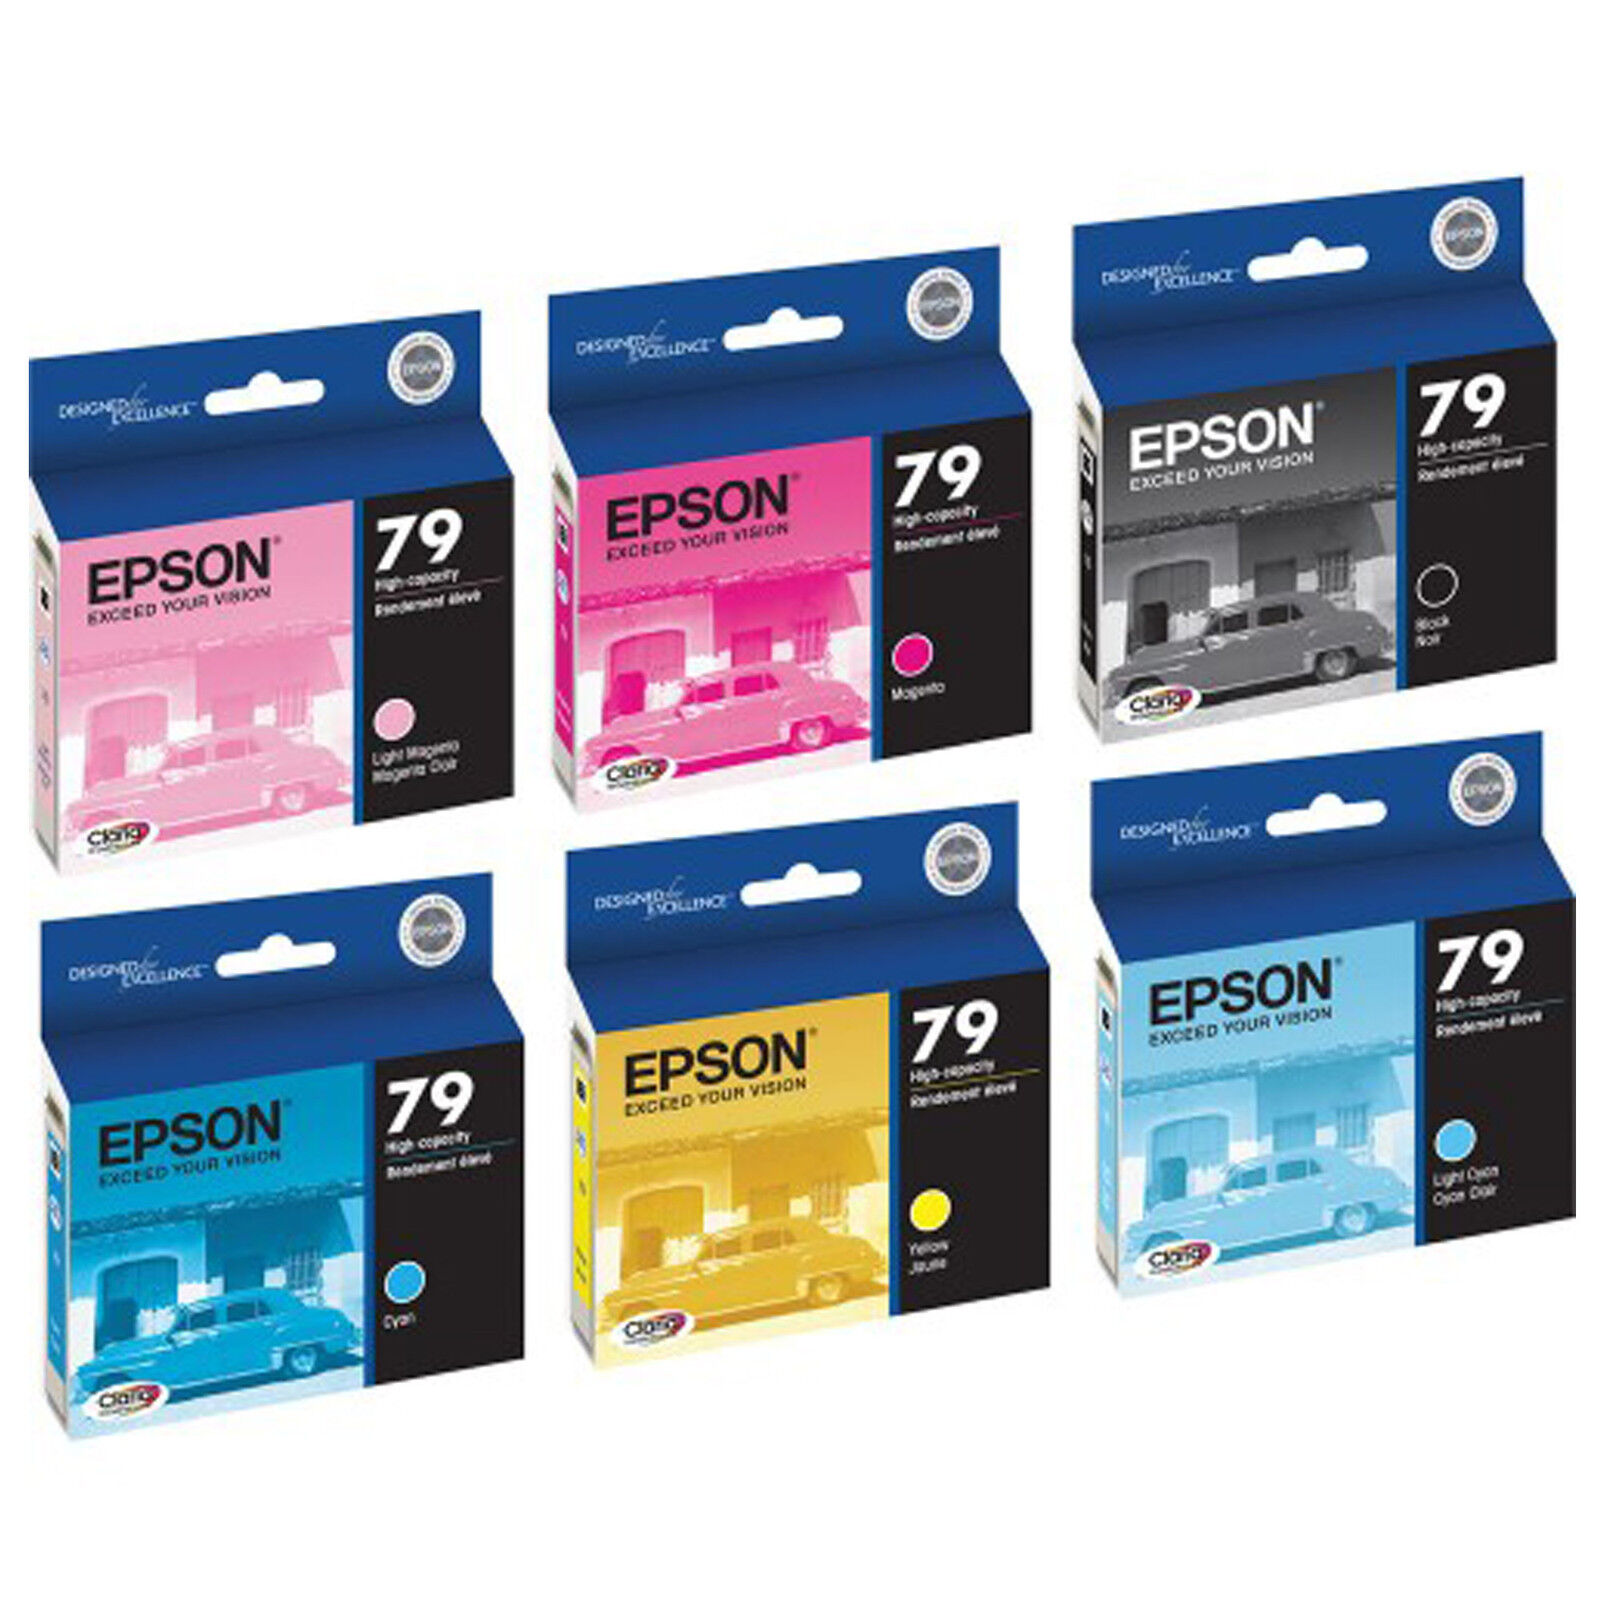 6 Genuine Epson 79 T079 Ink Cartridges for Stylus Photo 1400 and Artisan 1430